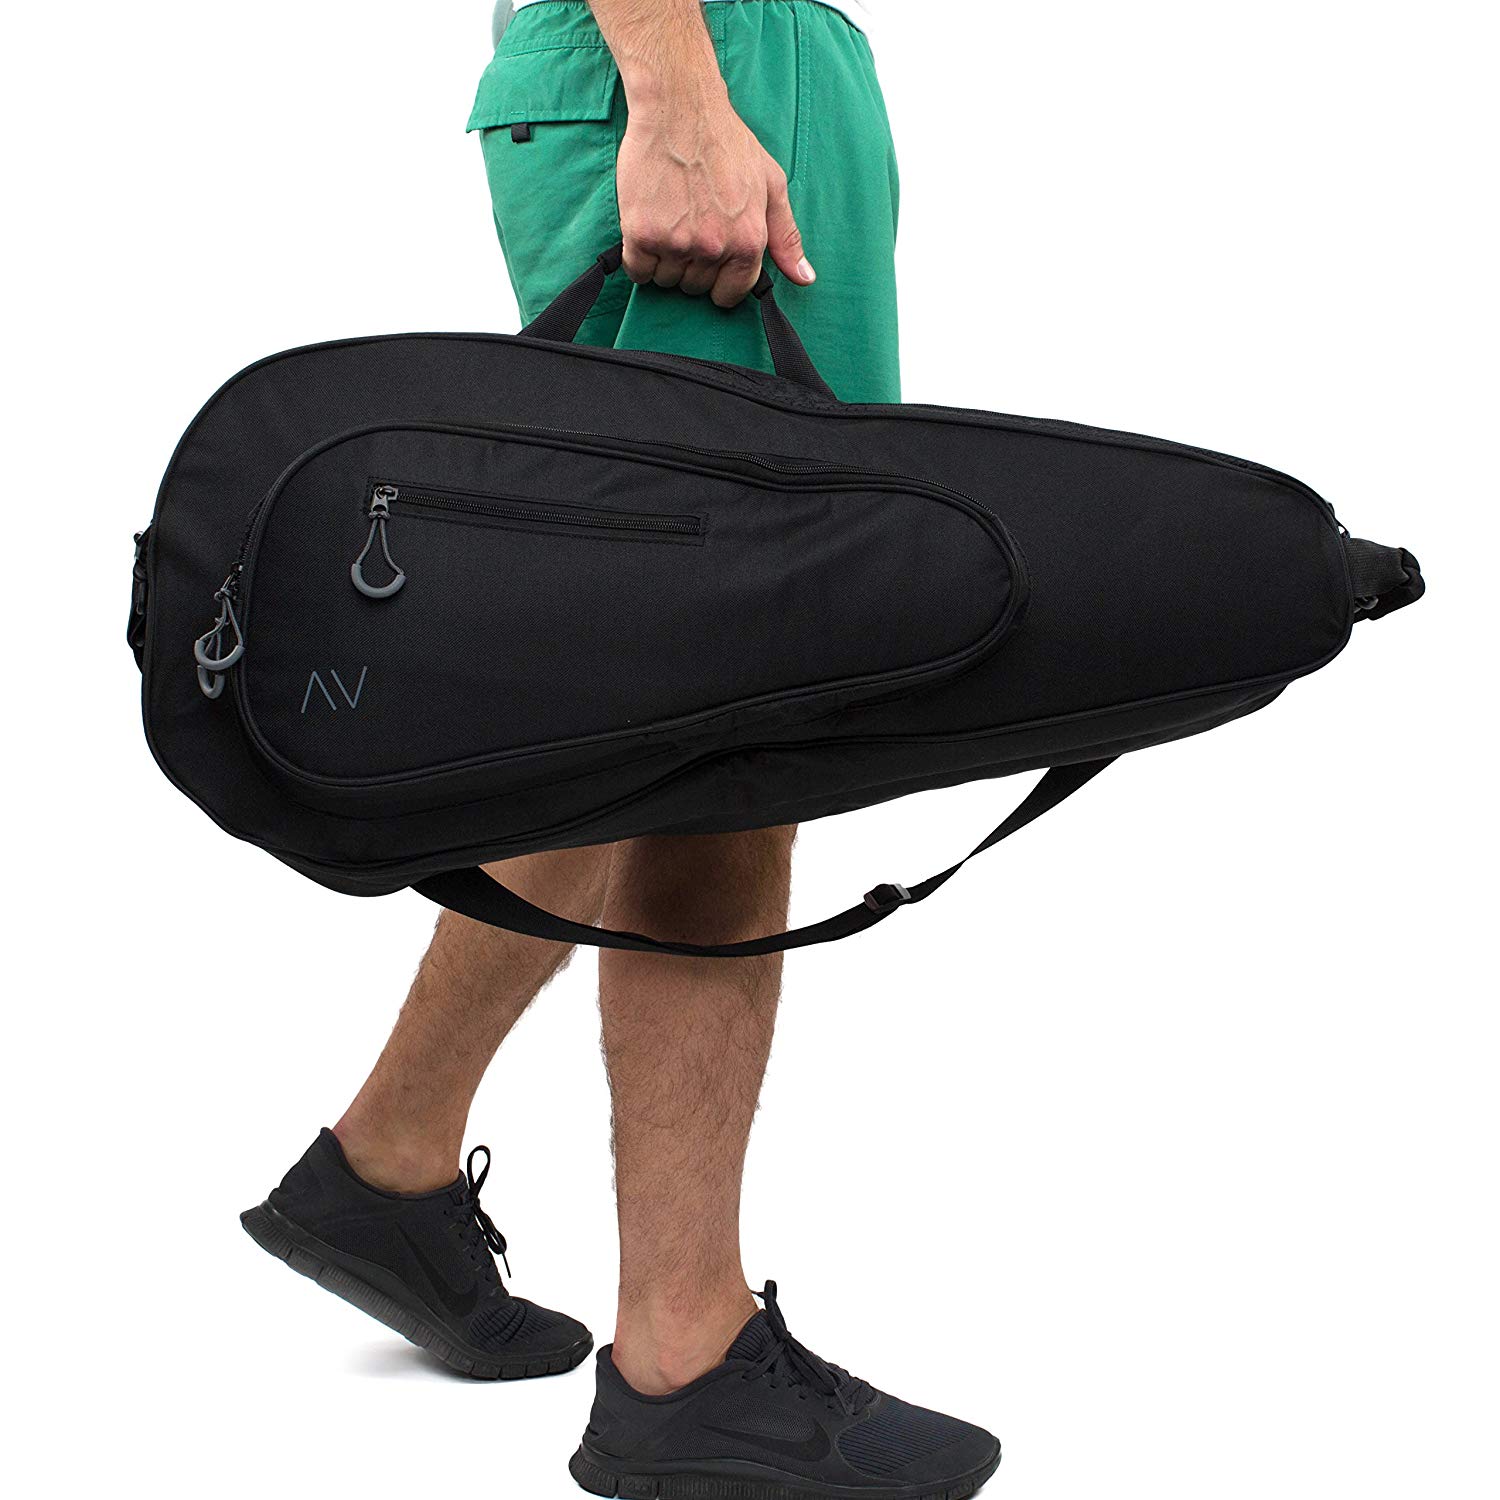 Carry a tennis racket bag - style and fashion